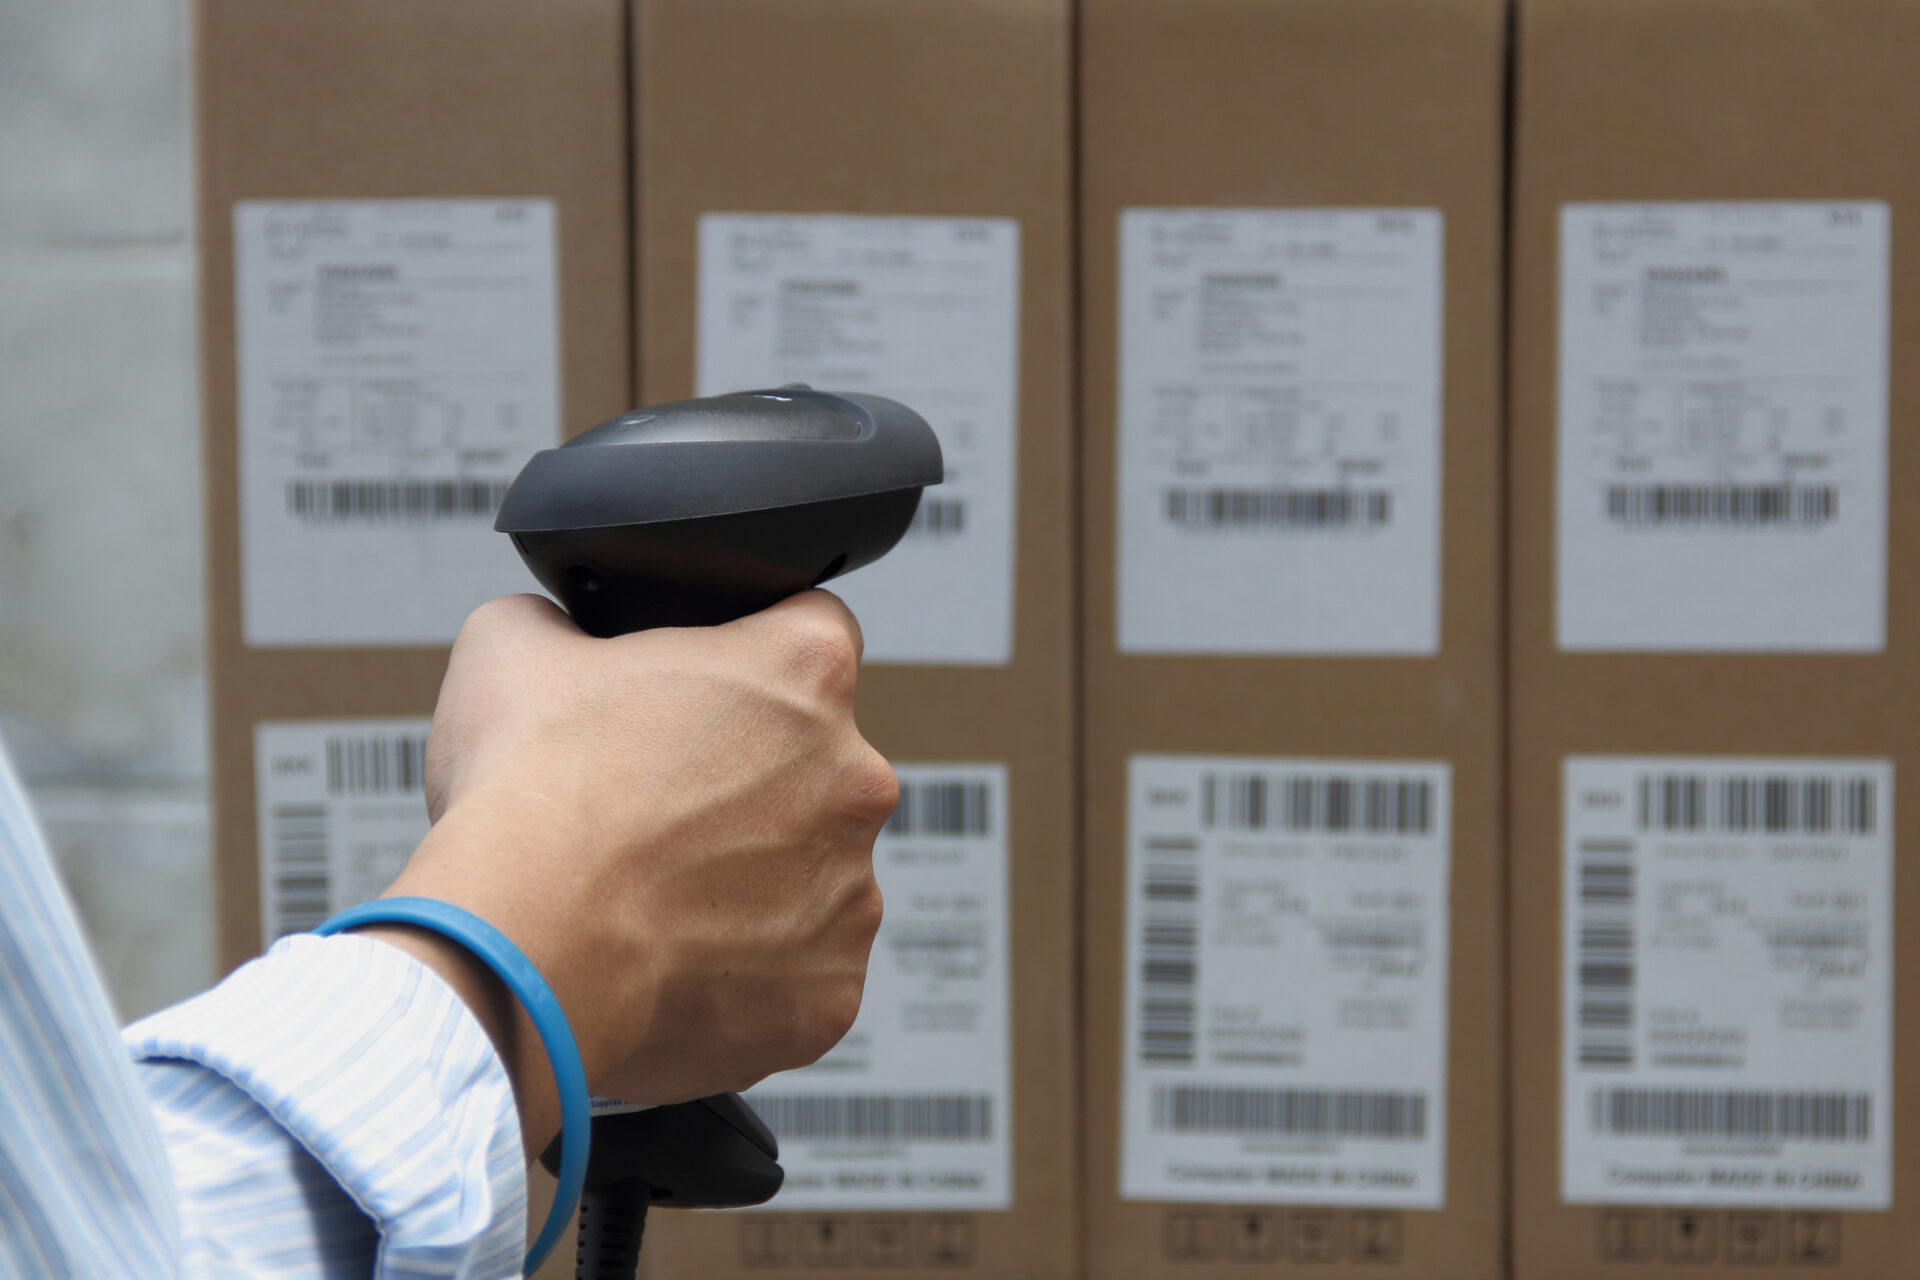 Man holding a barcode scanner and scanning labels at a distance